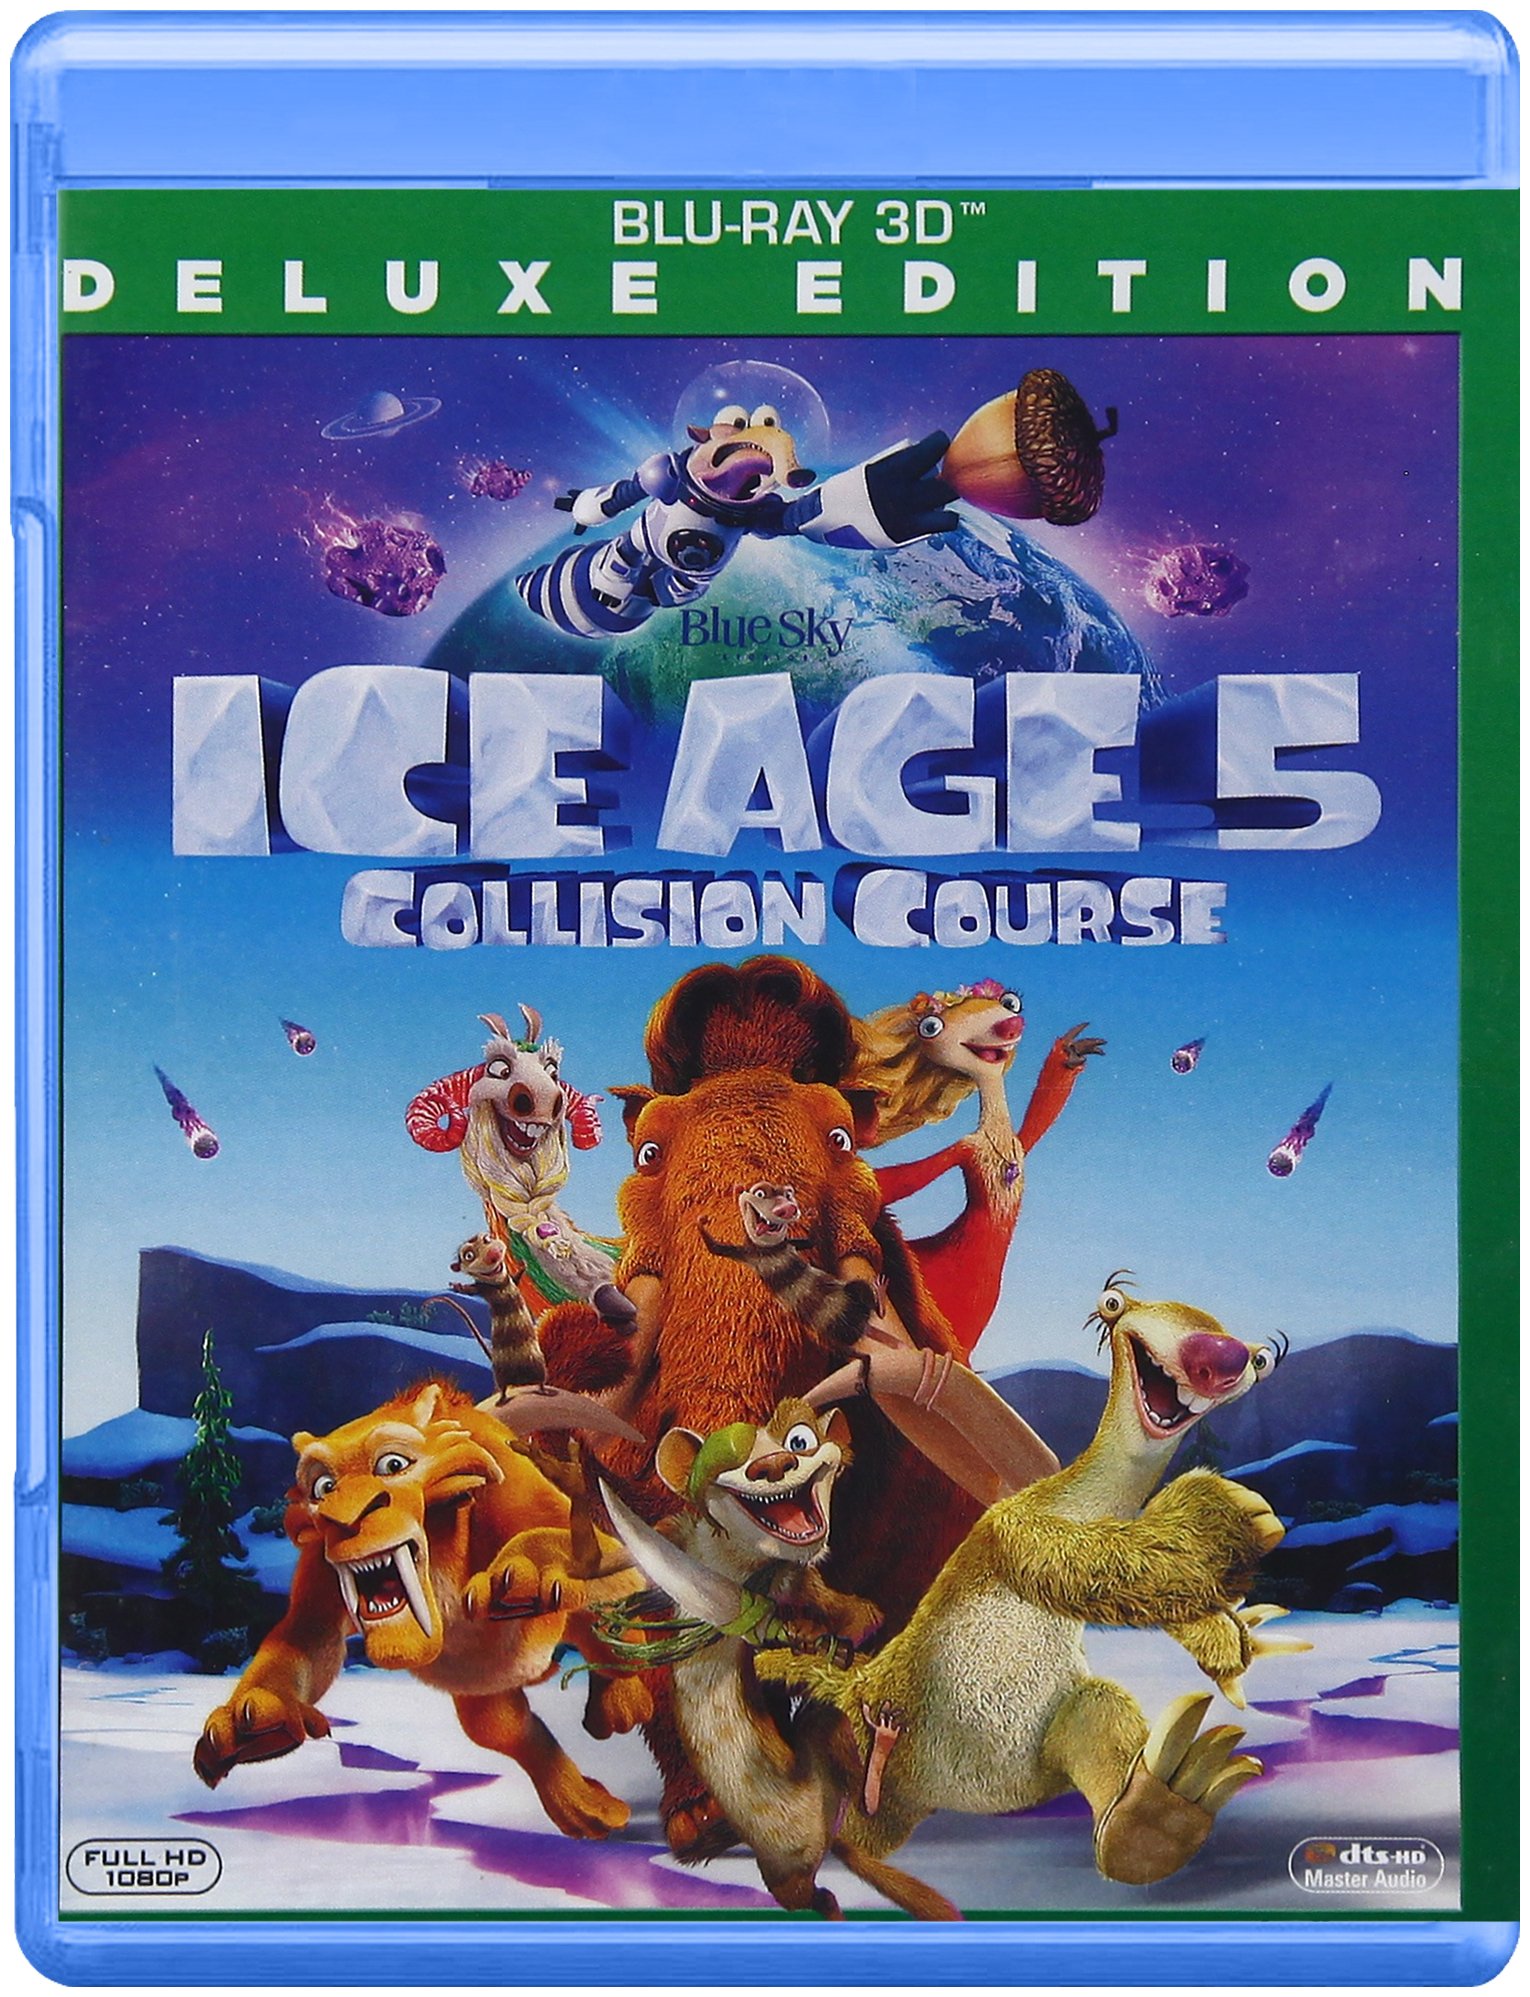 ice-age-5-collision-course-dvd-movie-purchase-or-watch-online